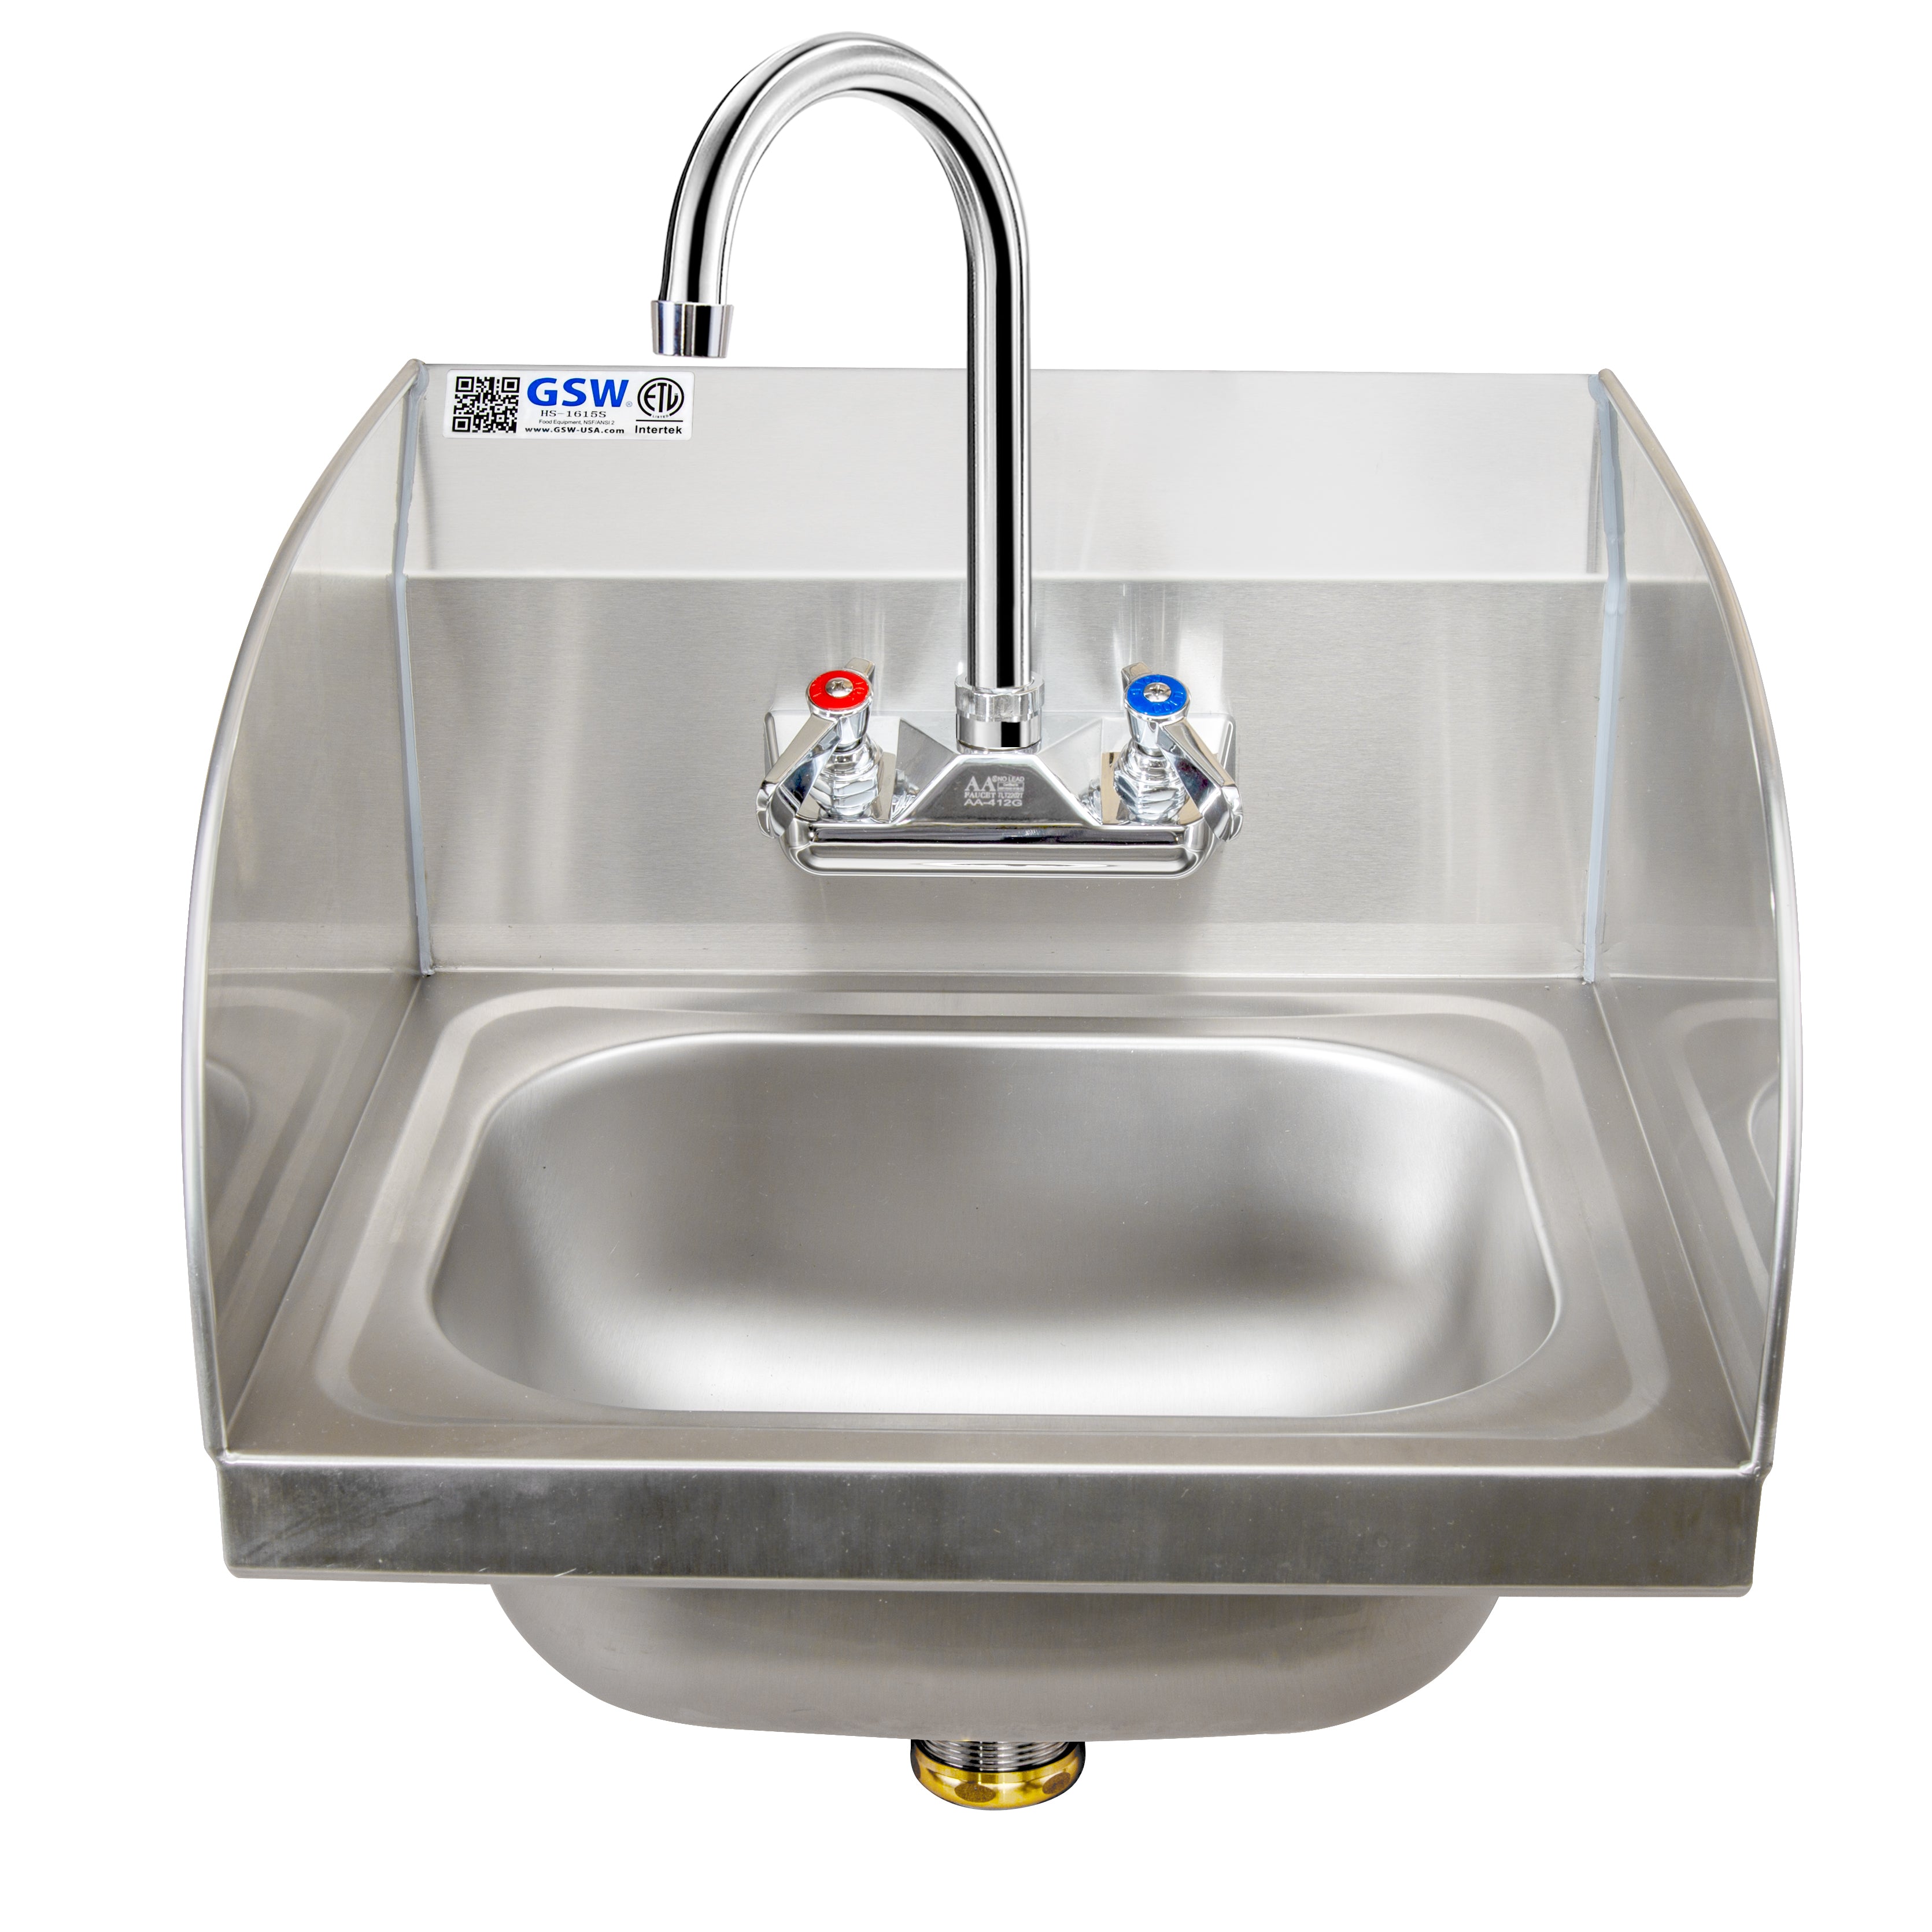 GSW Wall Mount Standard 16” x 15” Stainless Steel Hand Sink with Protective Edge Welded Splash Guards